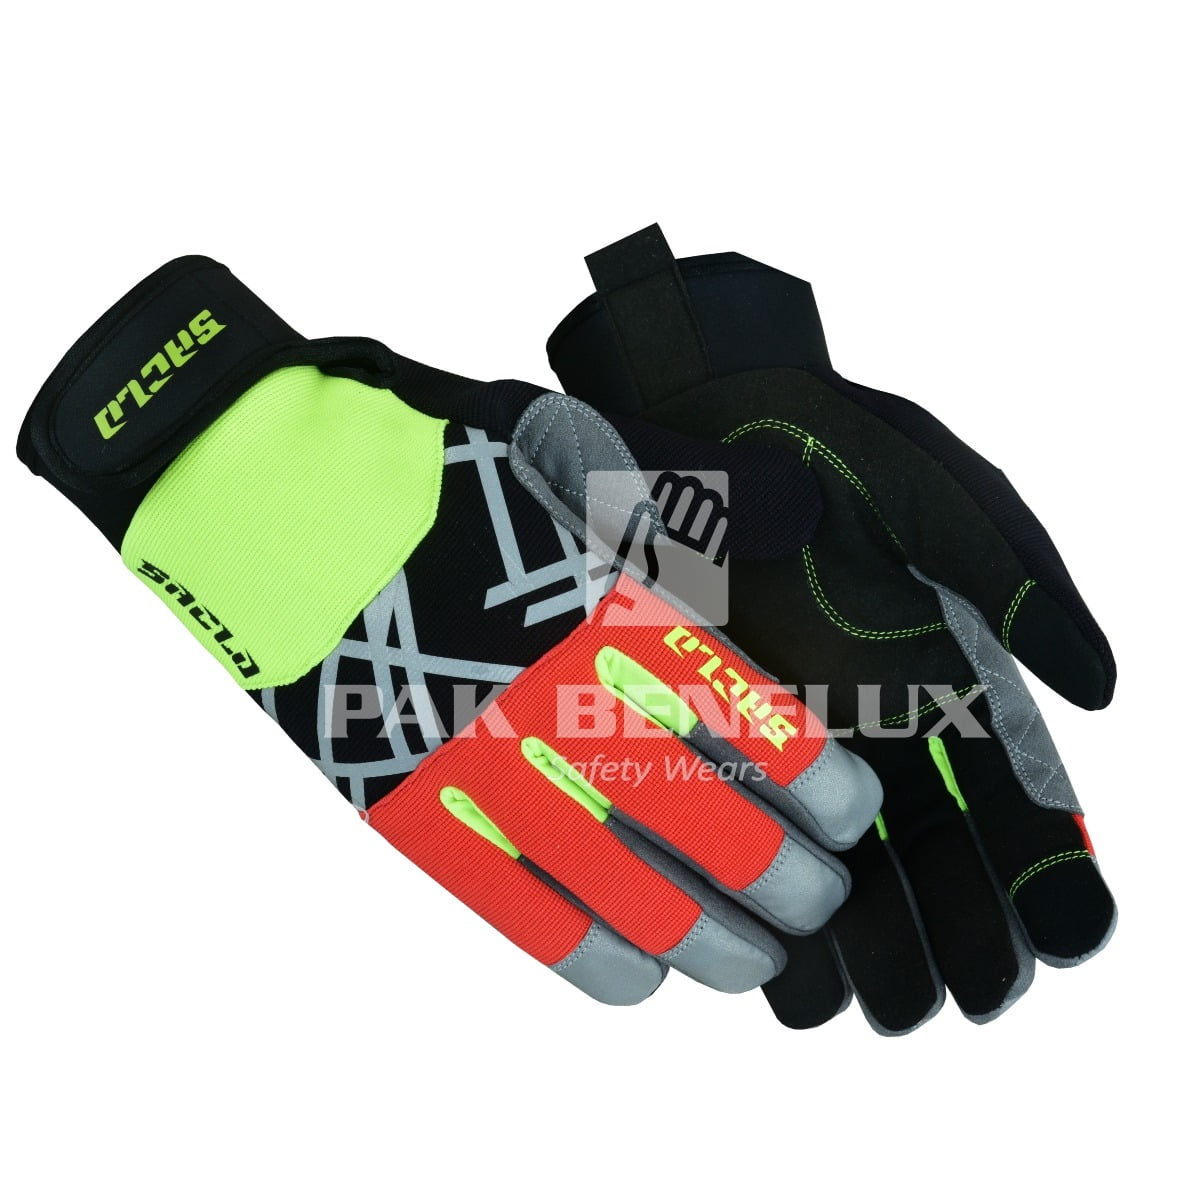 High Visible Gloves Manufacturer in Pakistan